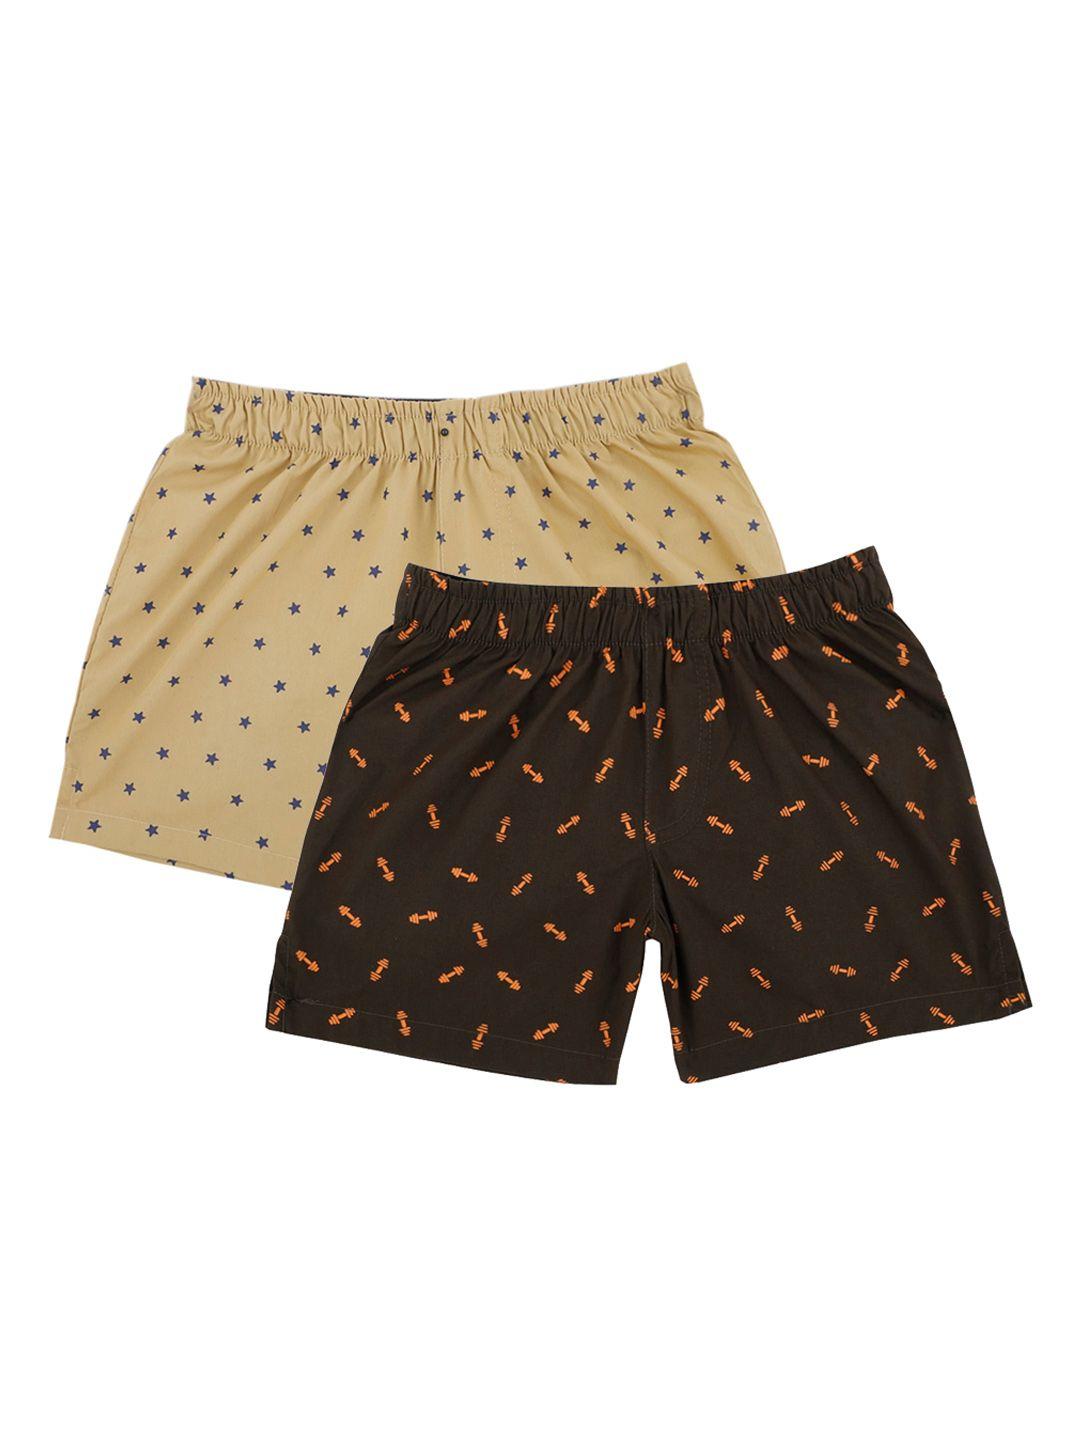 bodycare kids boys pack of 2 conversational printed shorts